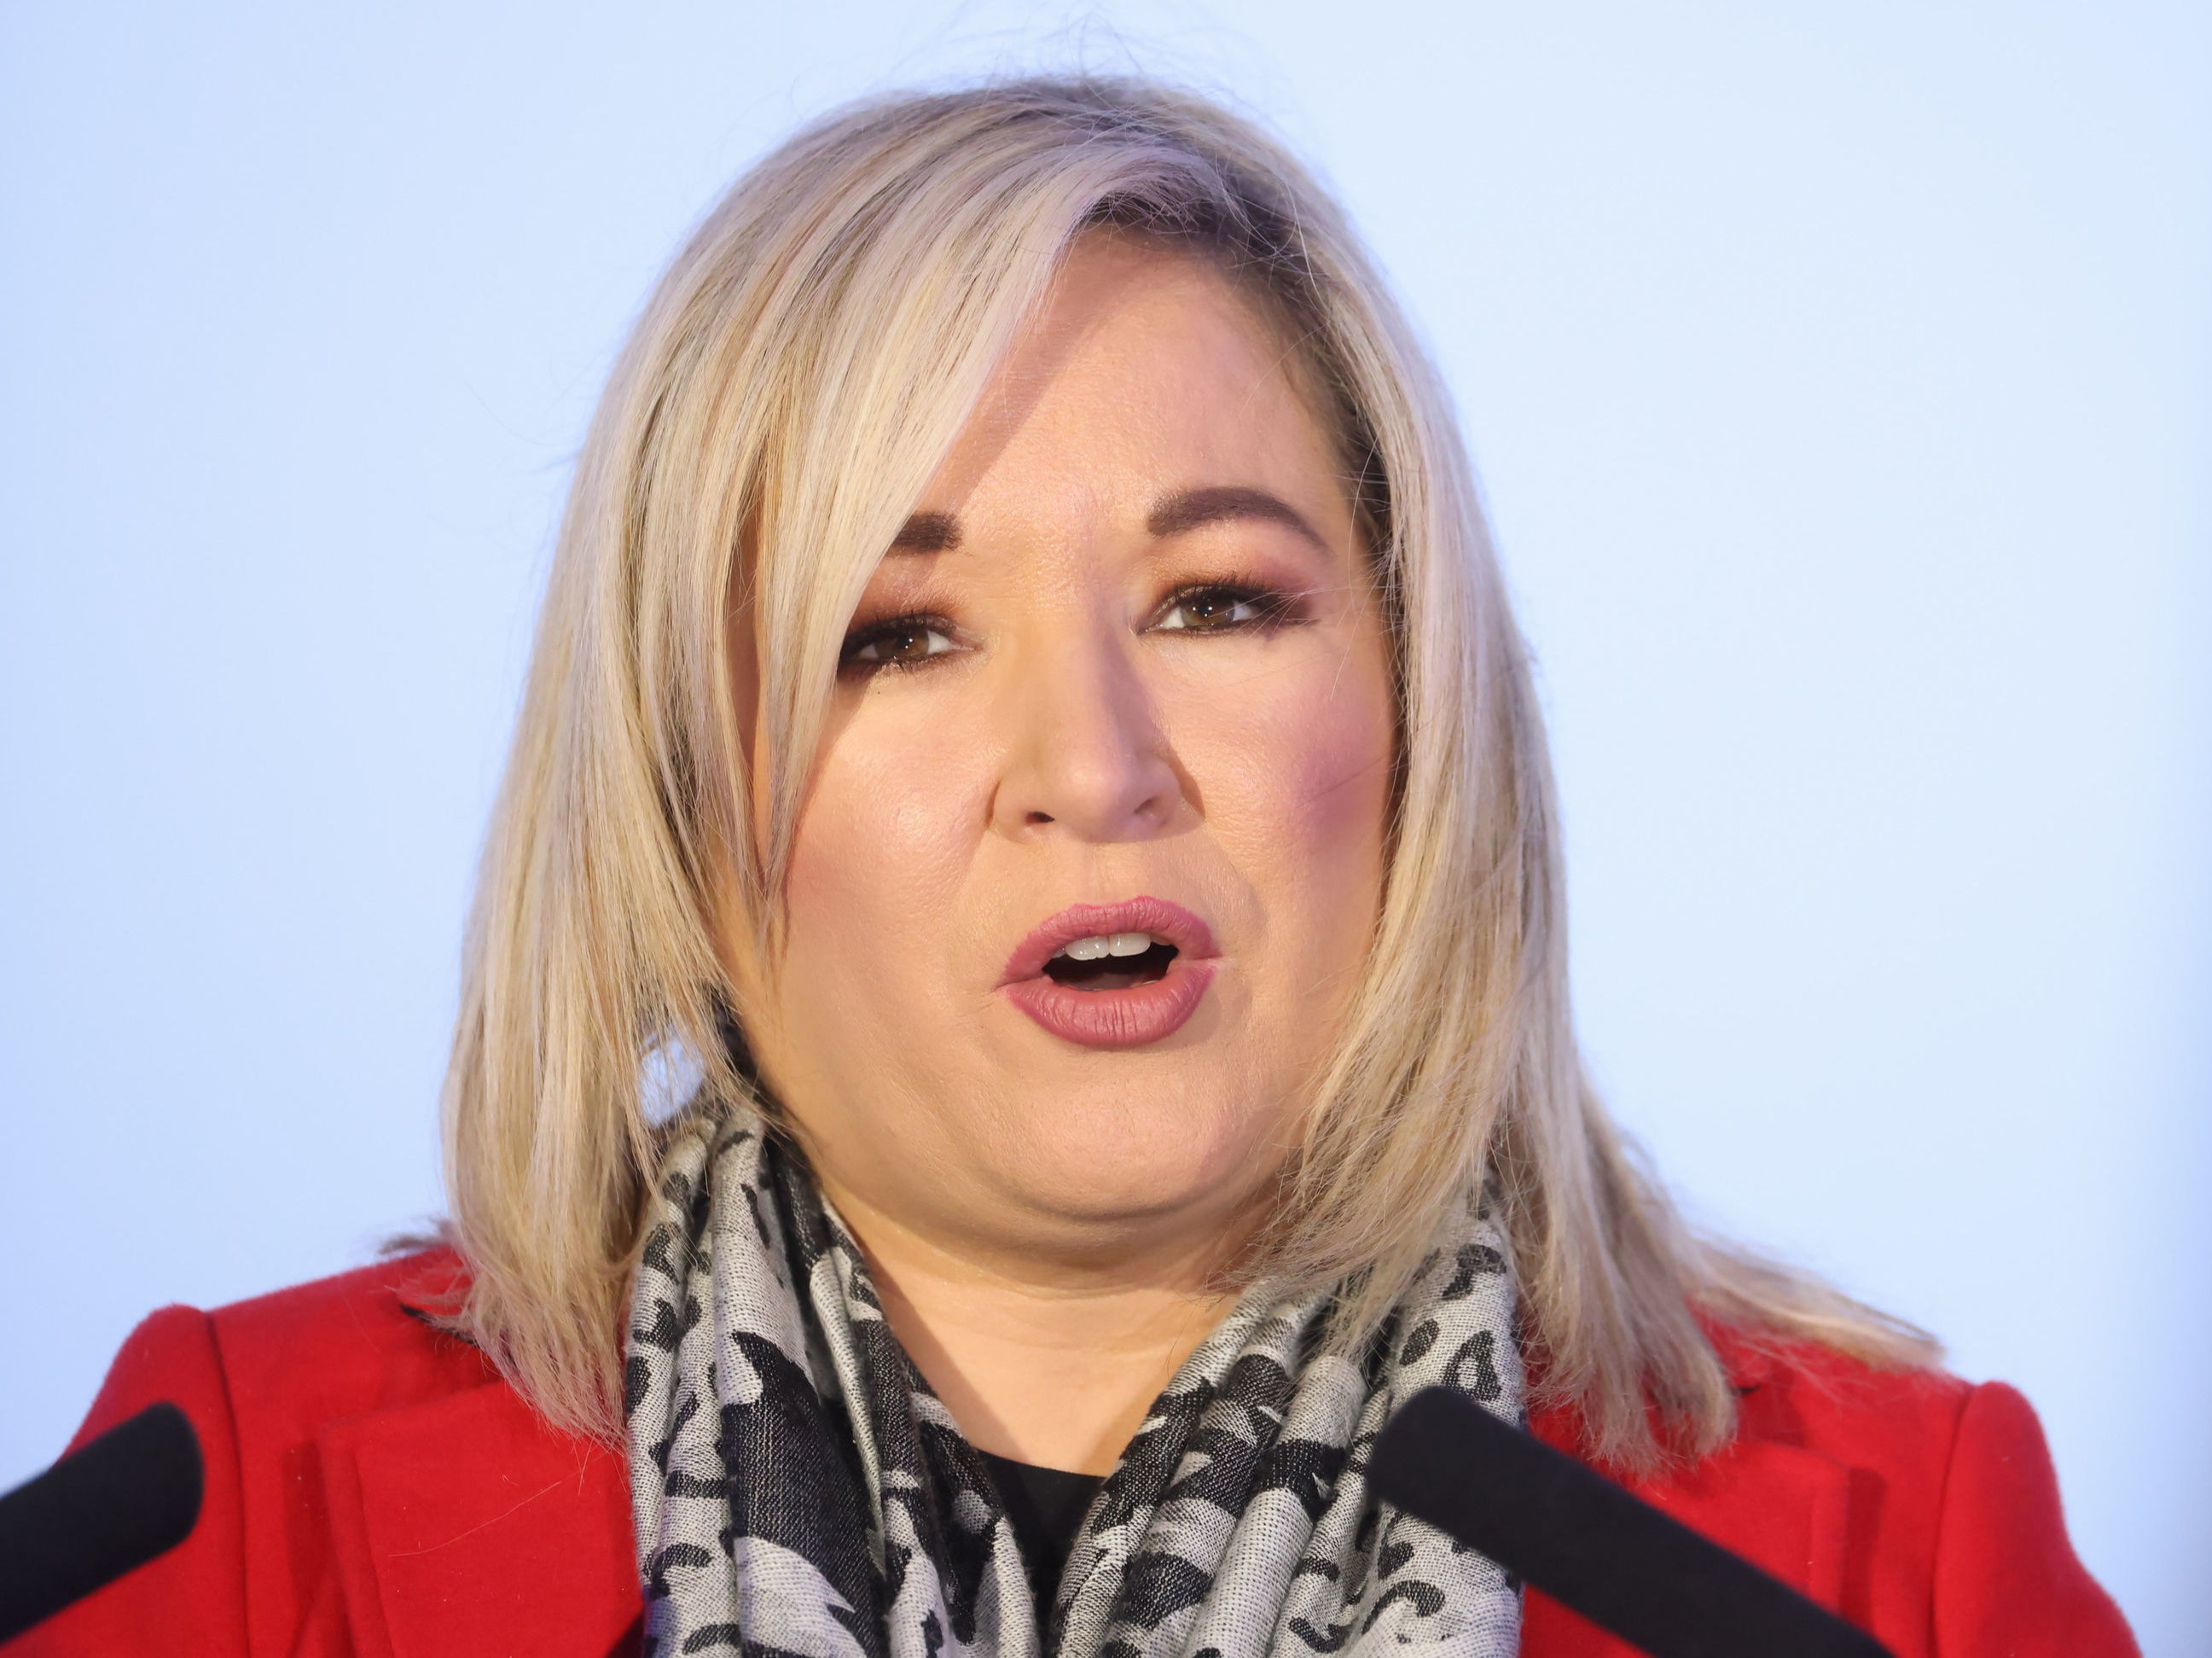 Sinn Fein's Michelle O’Neill is calling for an urgent meeting with the chief constable of the PSNI